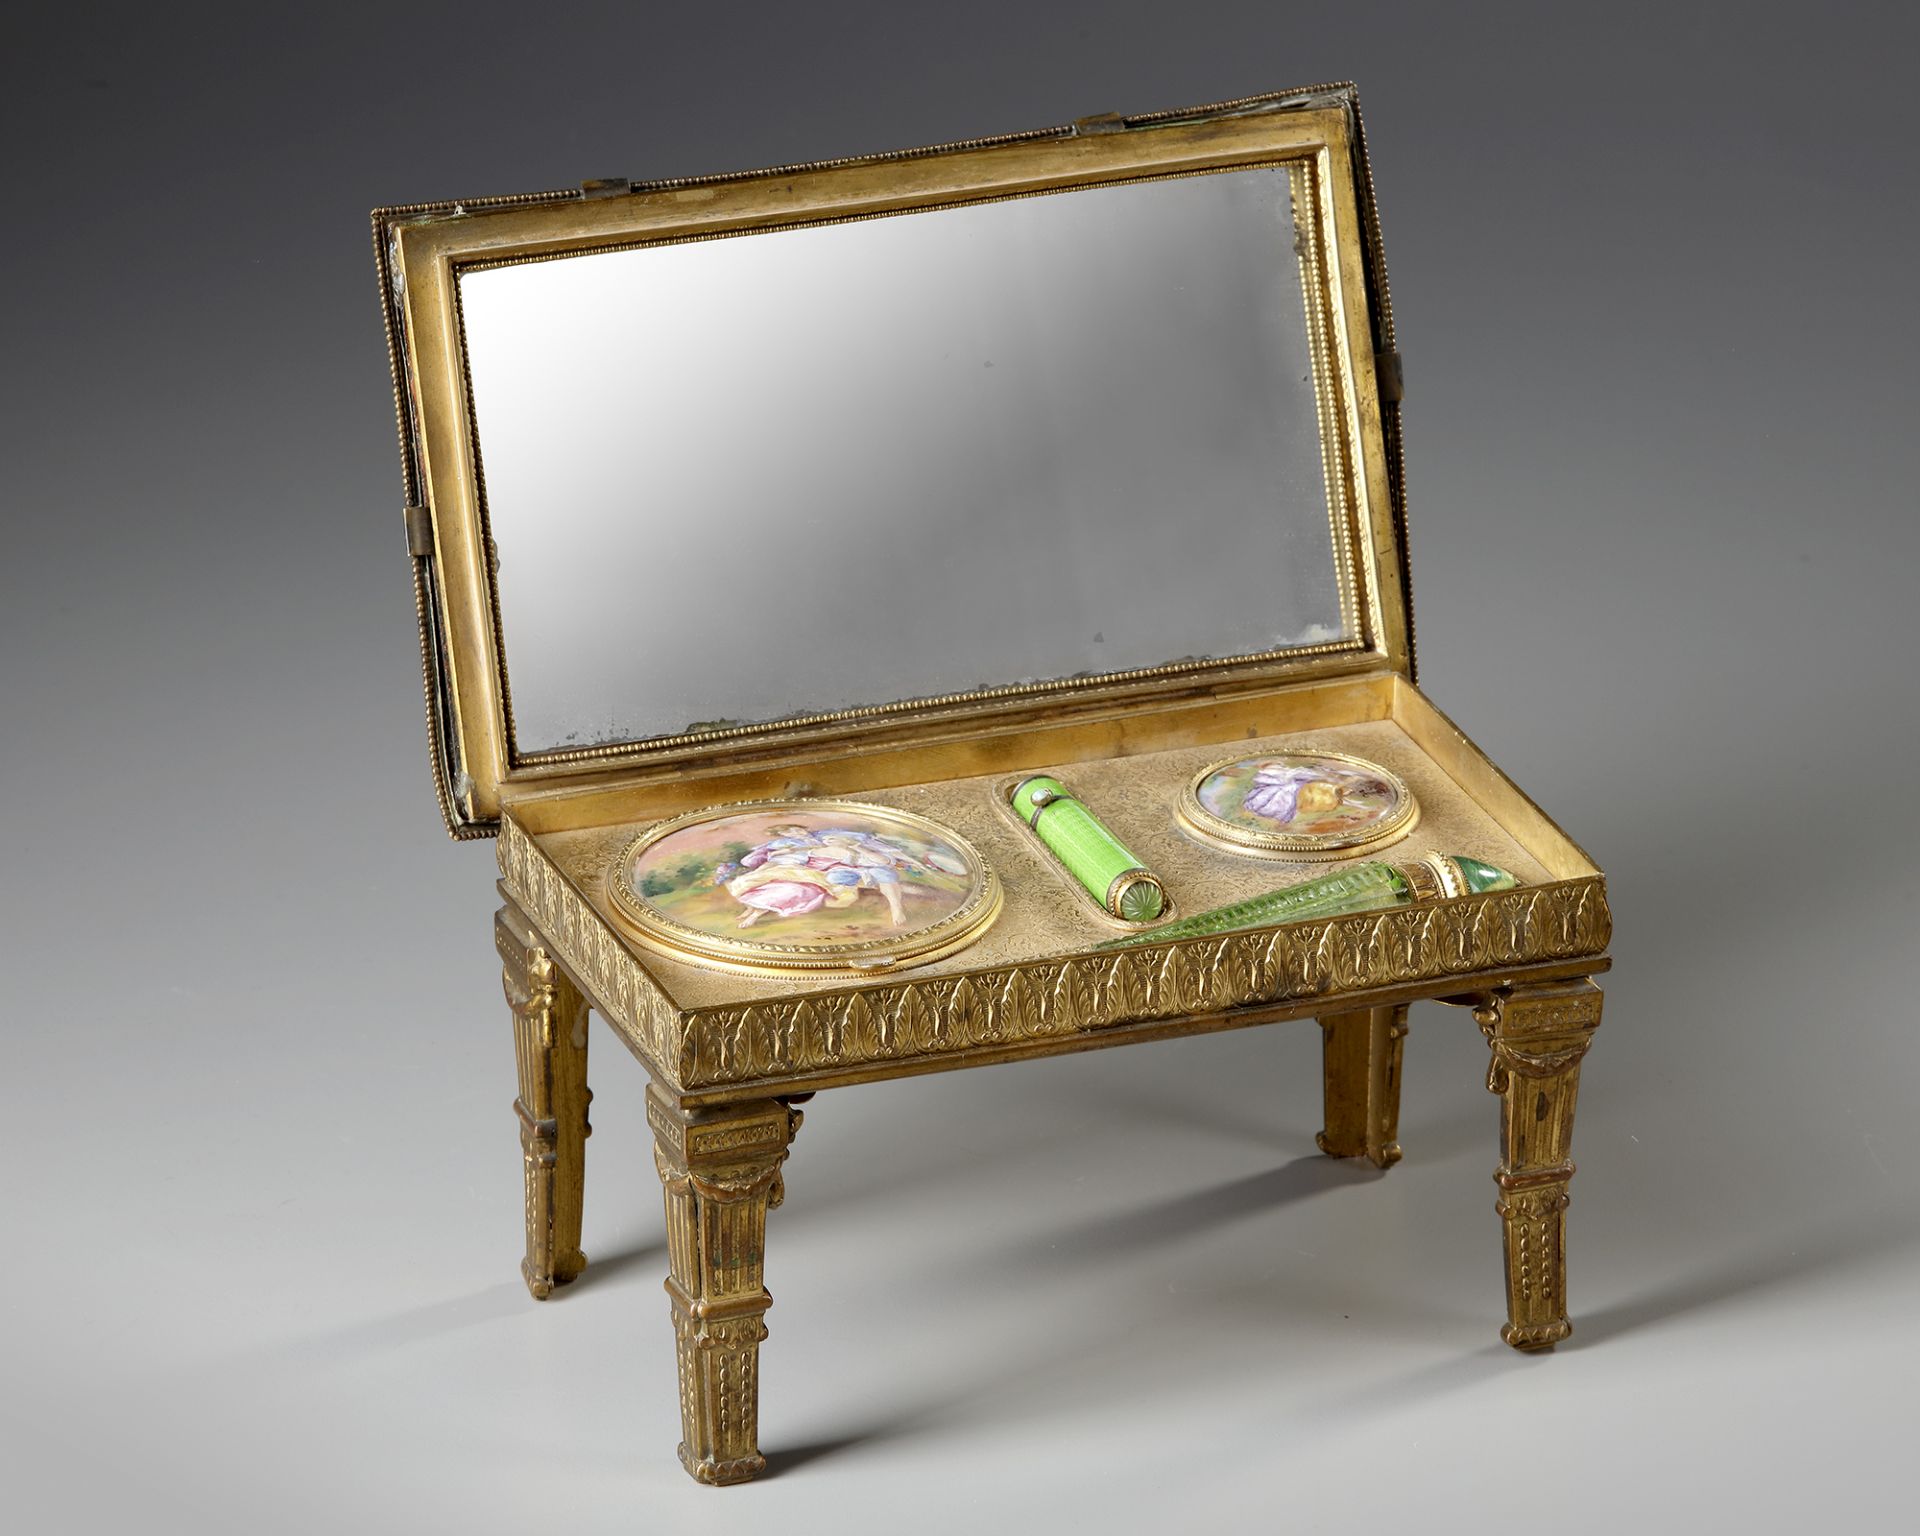 AN AUSTRIAN ENAMEL MINIATURE TABLE WITH PERFUME VIAL, LATE 19TH CENTURY - Image 2 of 5